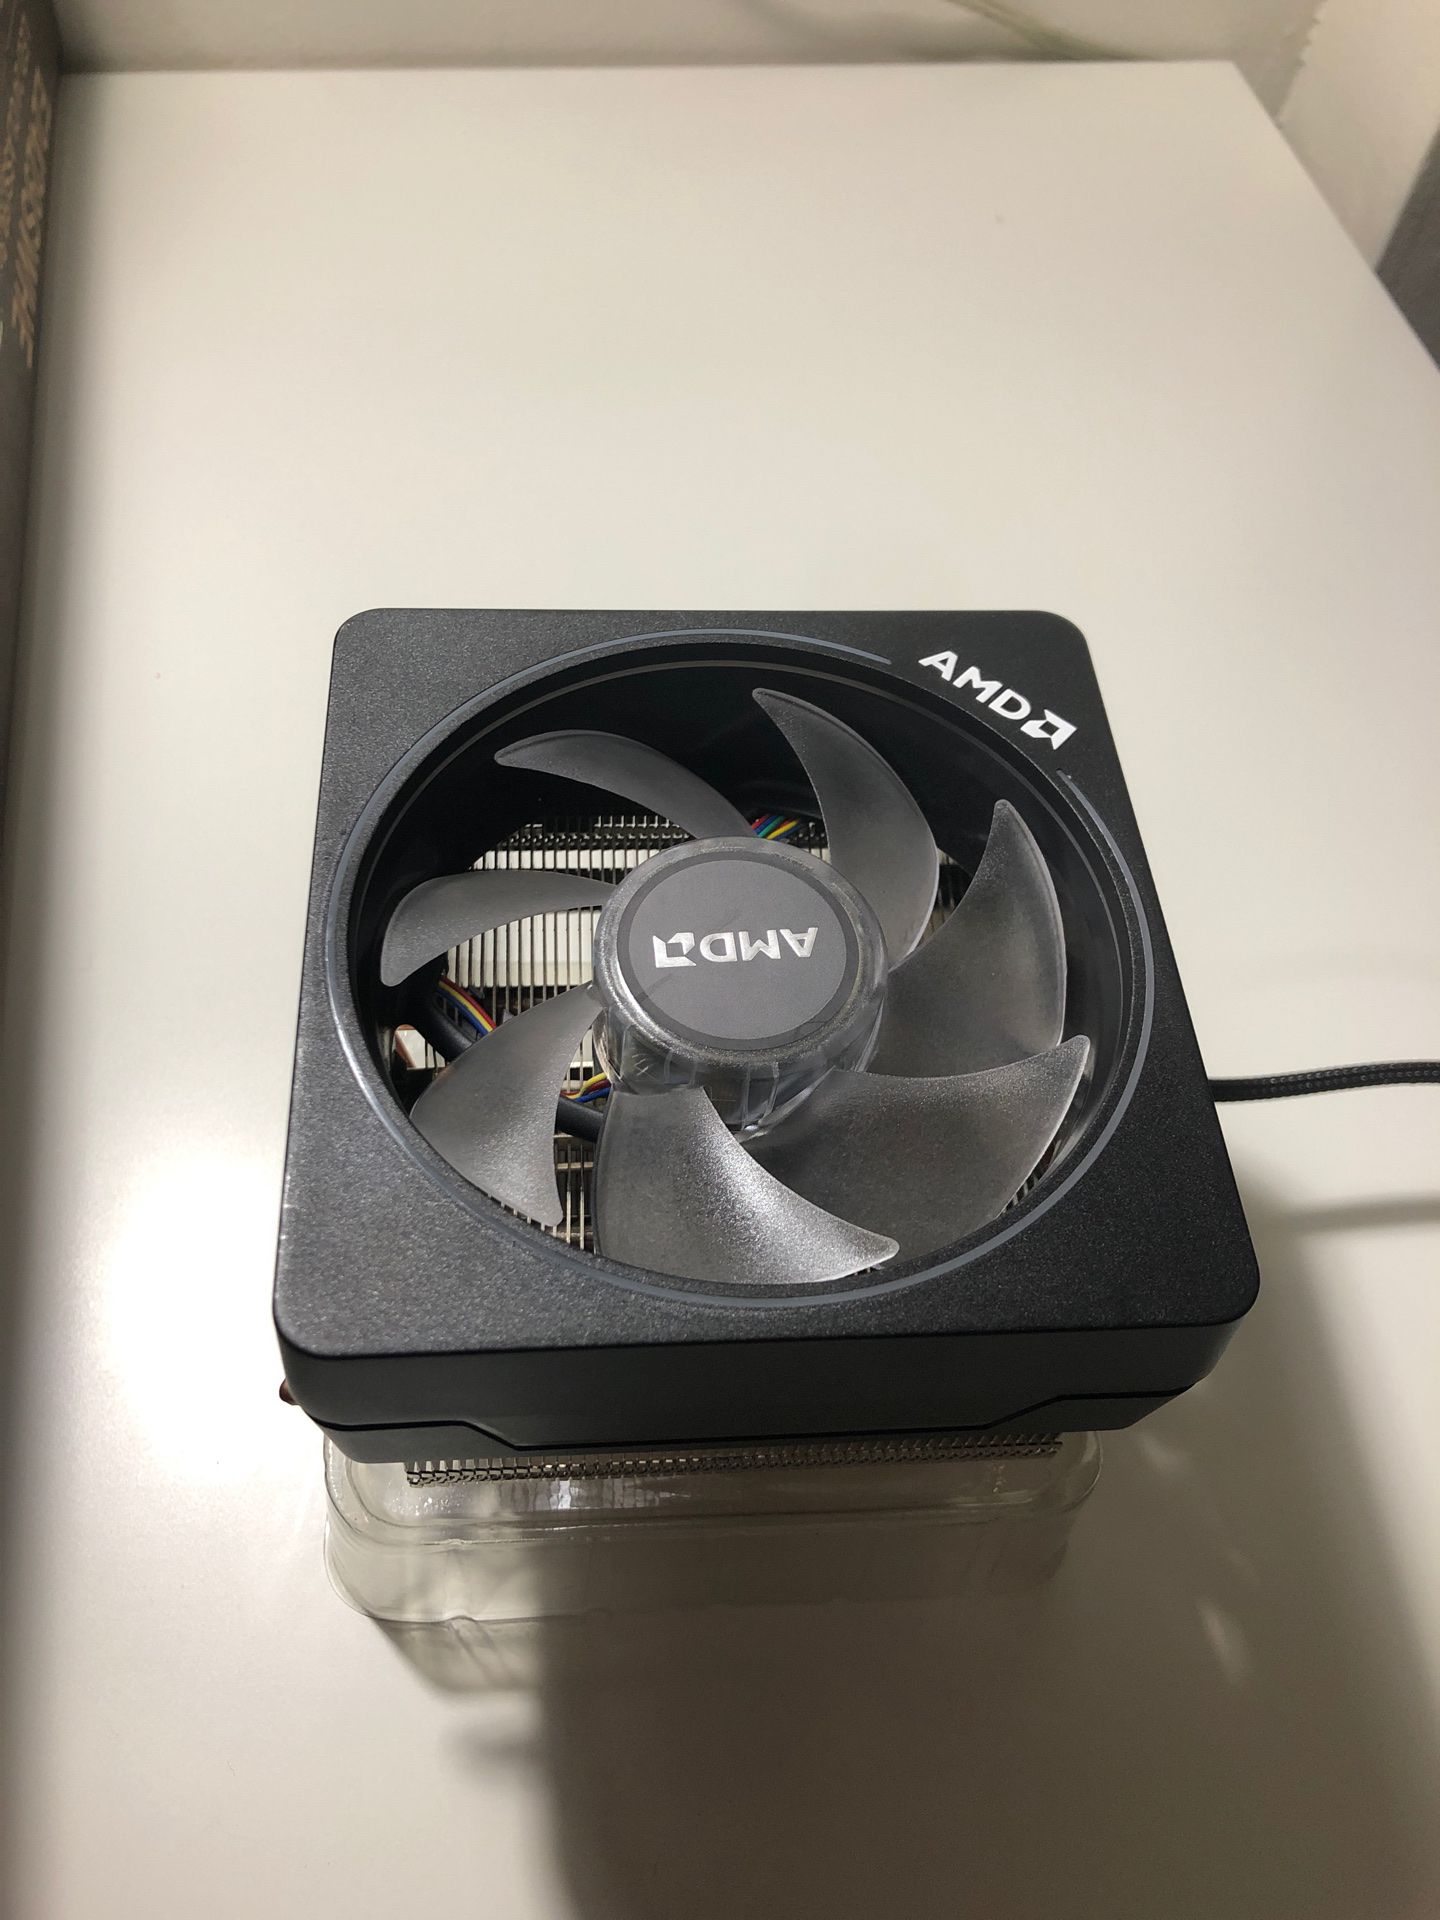 Wraith prism cpu cooler $35 or best offer